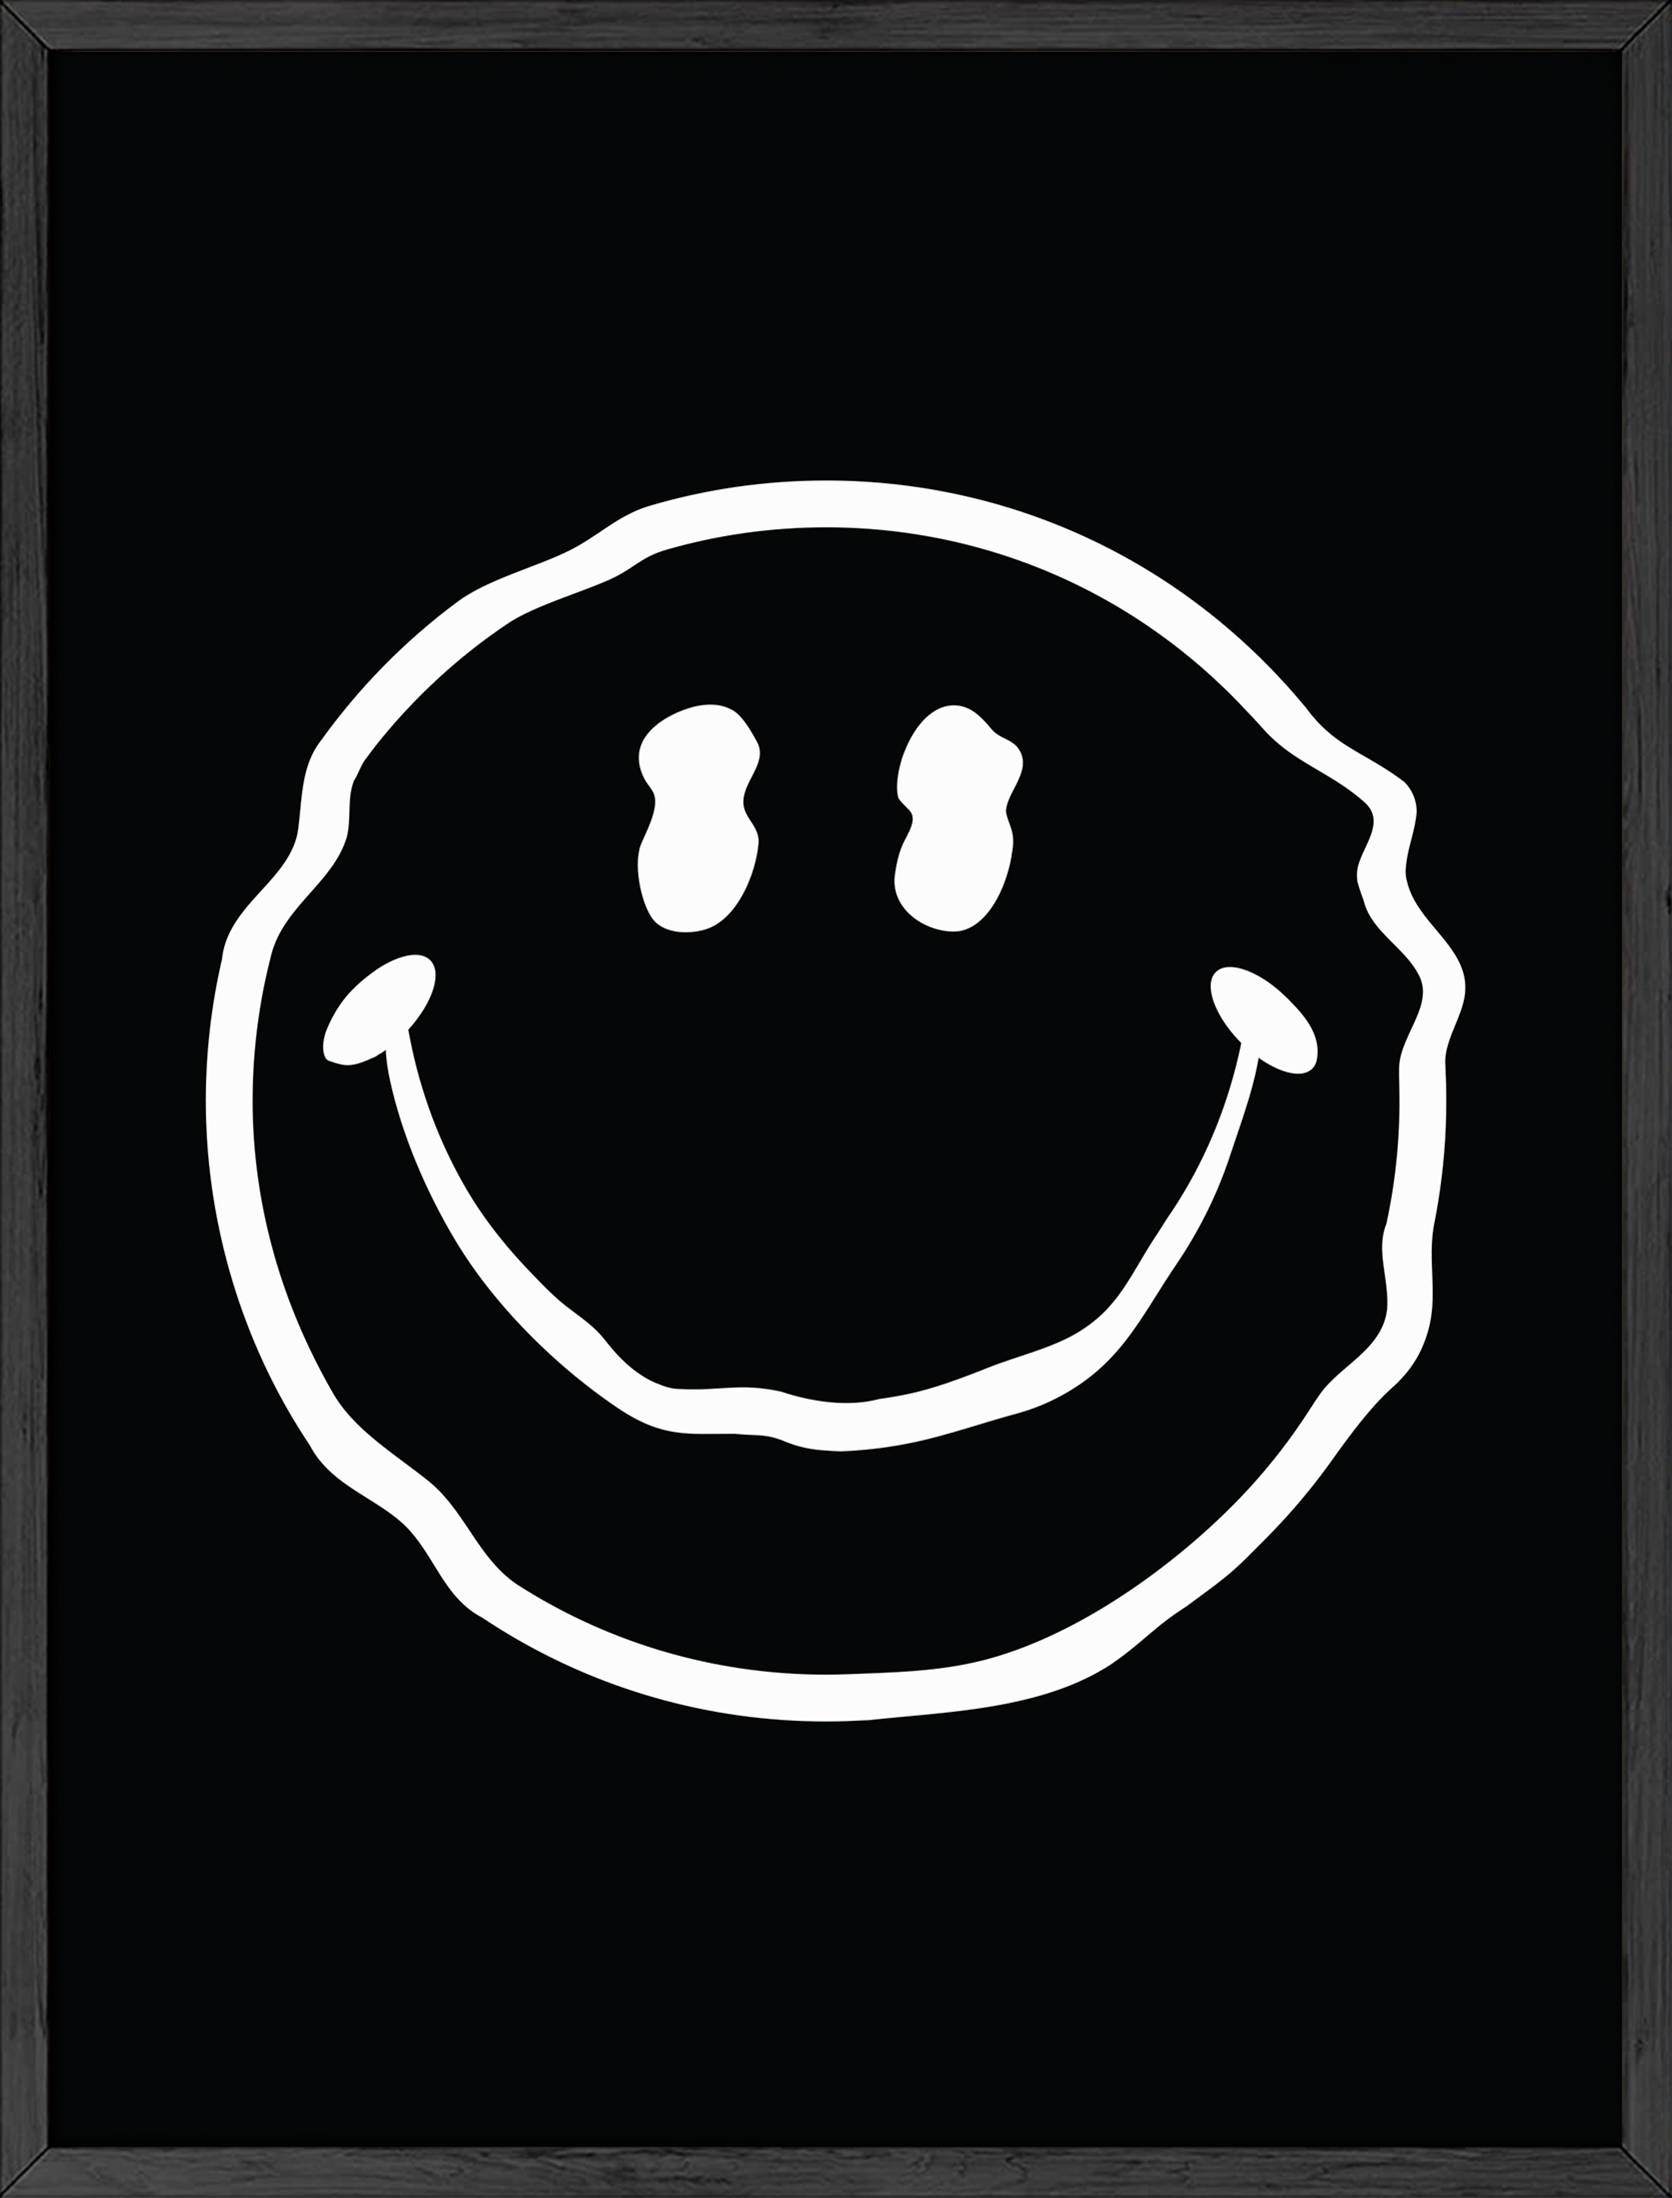 smiley face black and white png